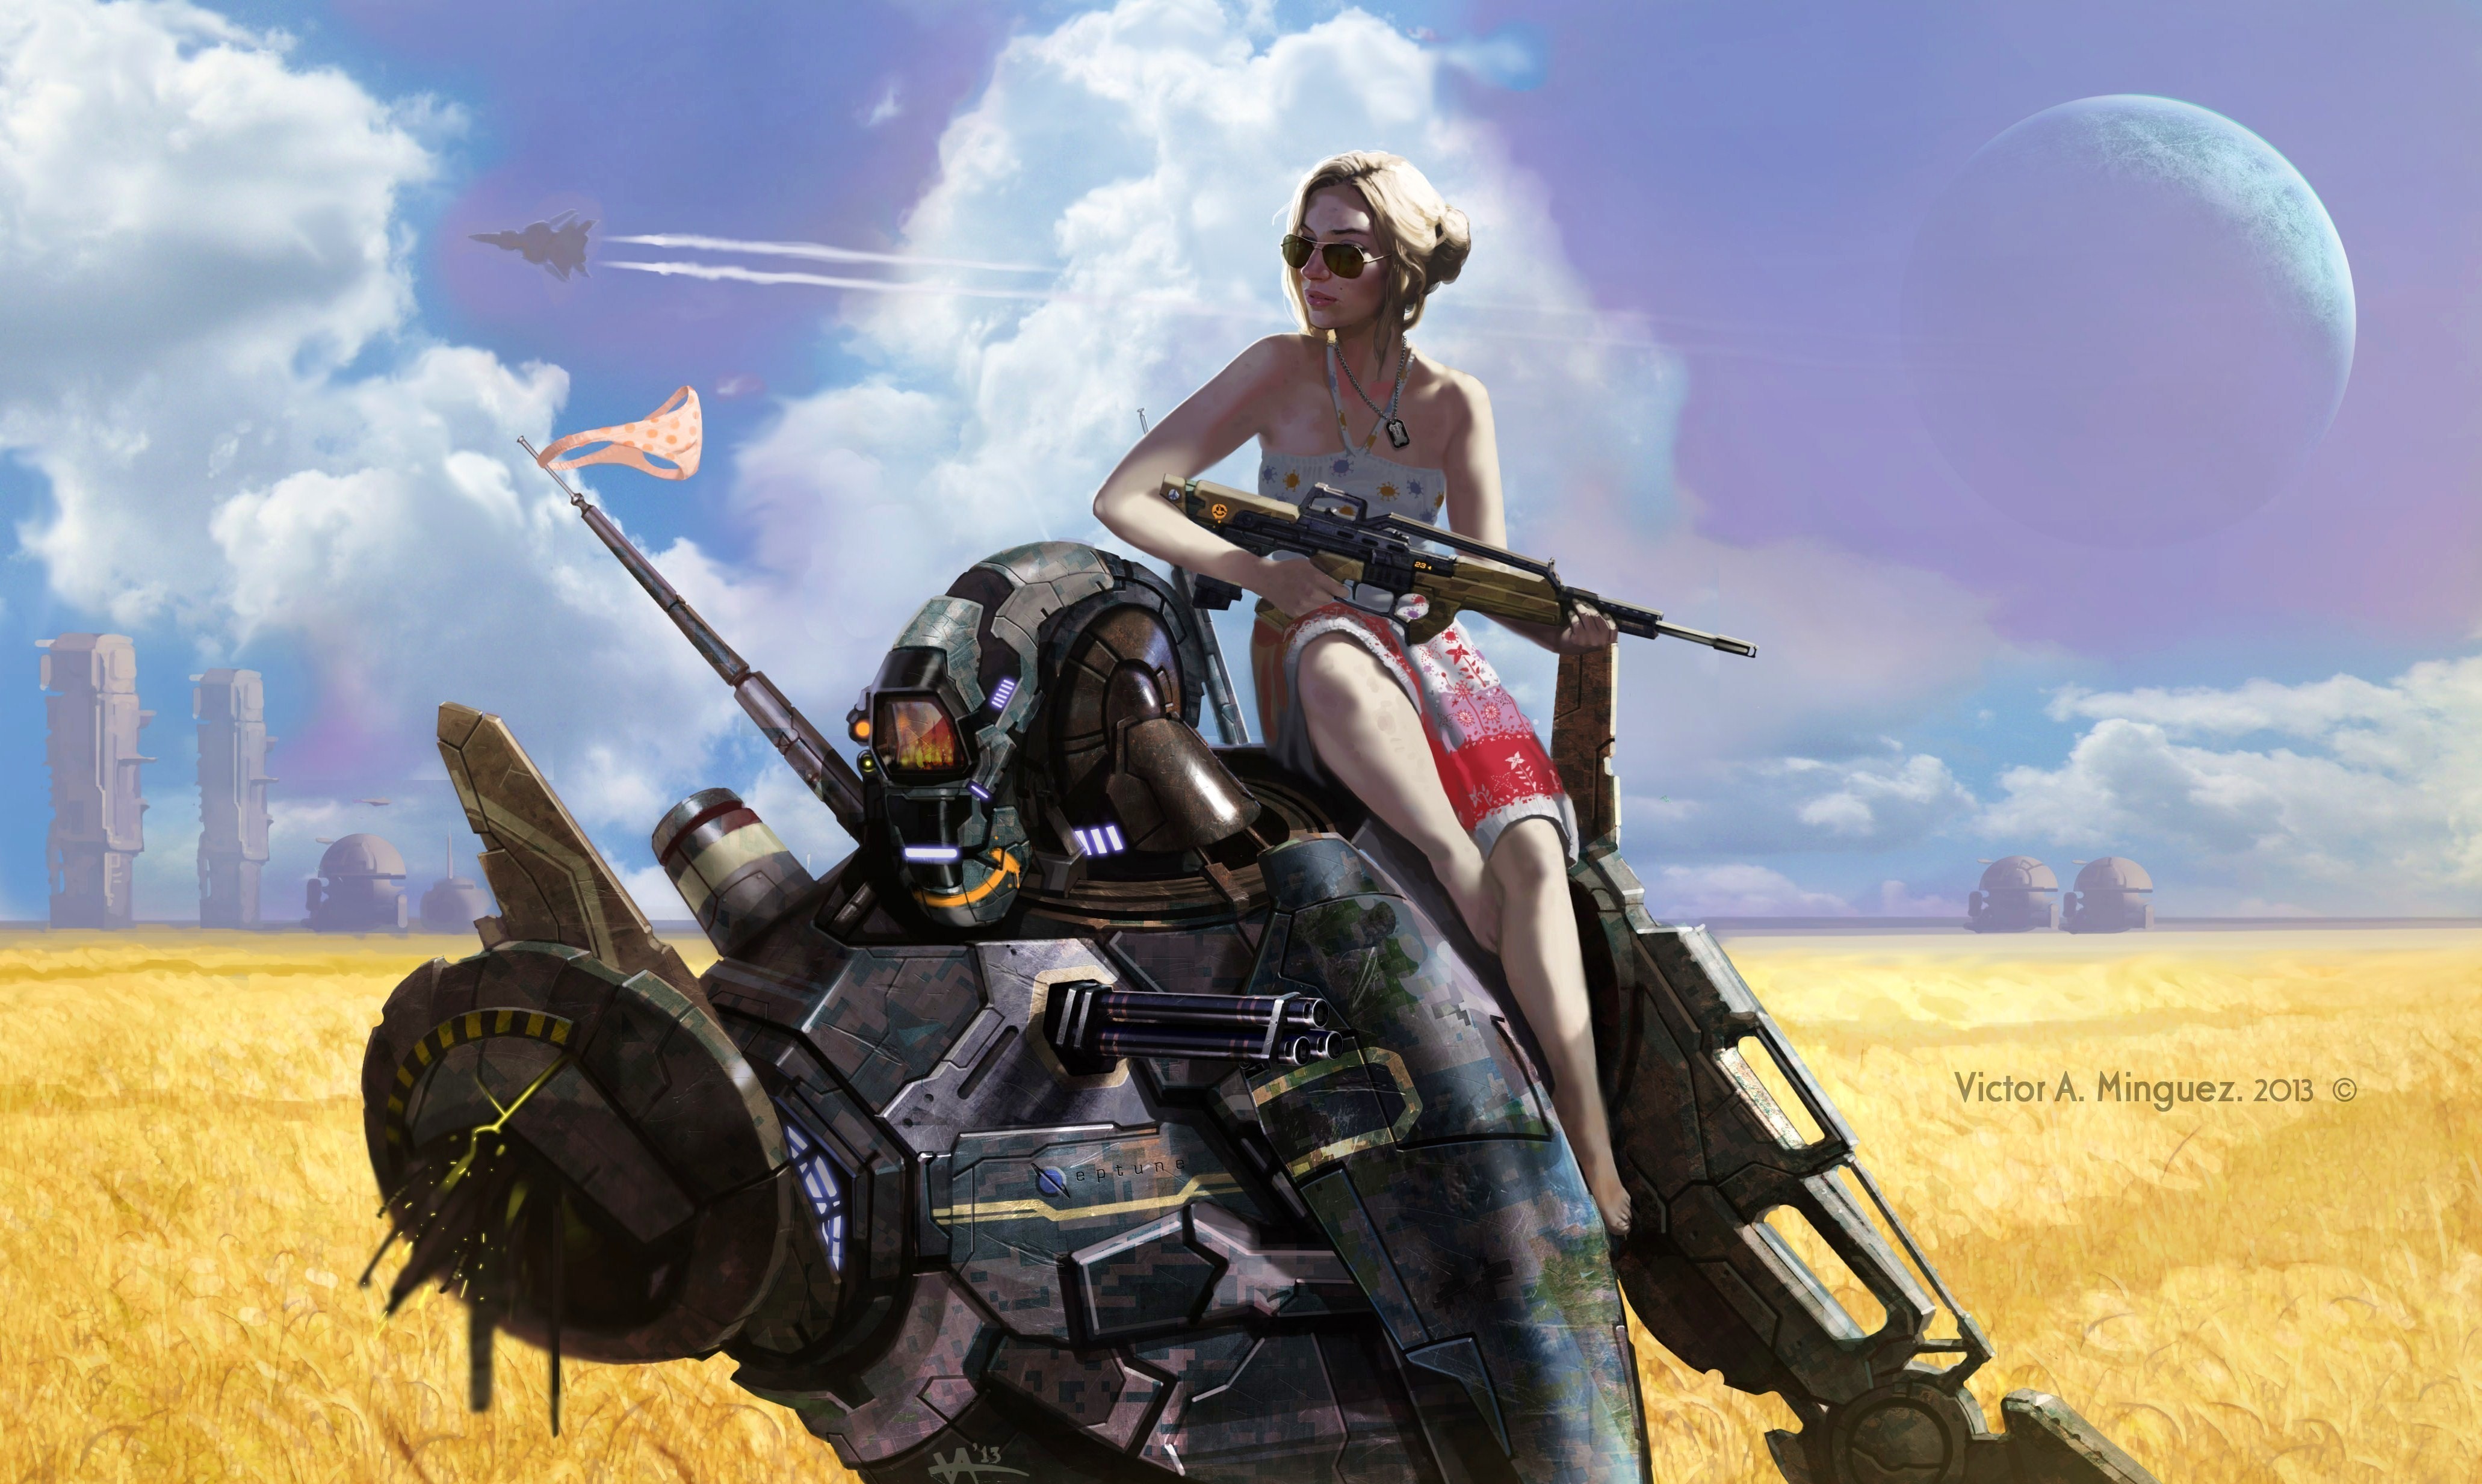 General 4124x2466 artwork science fiction women sky weapon 2013 (Year) girls with guns science fiction women women with shades sunglasses Victor A. Minguez